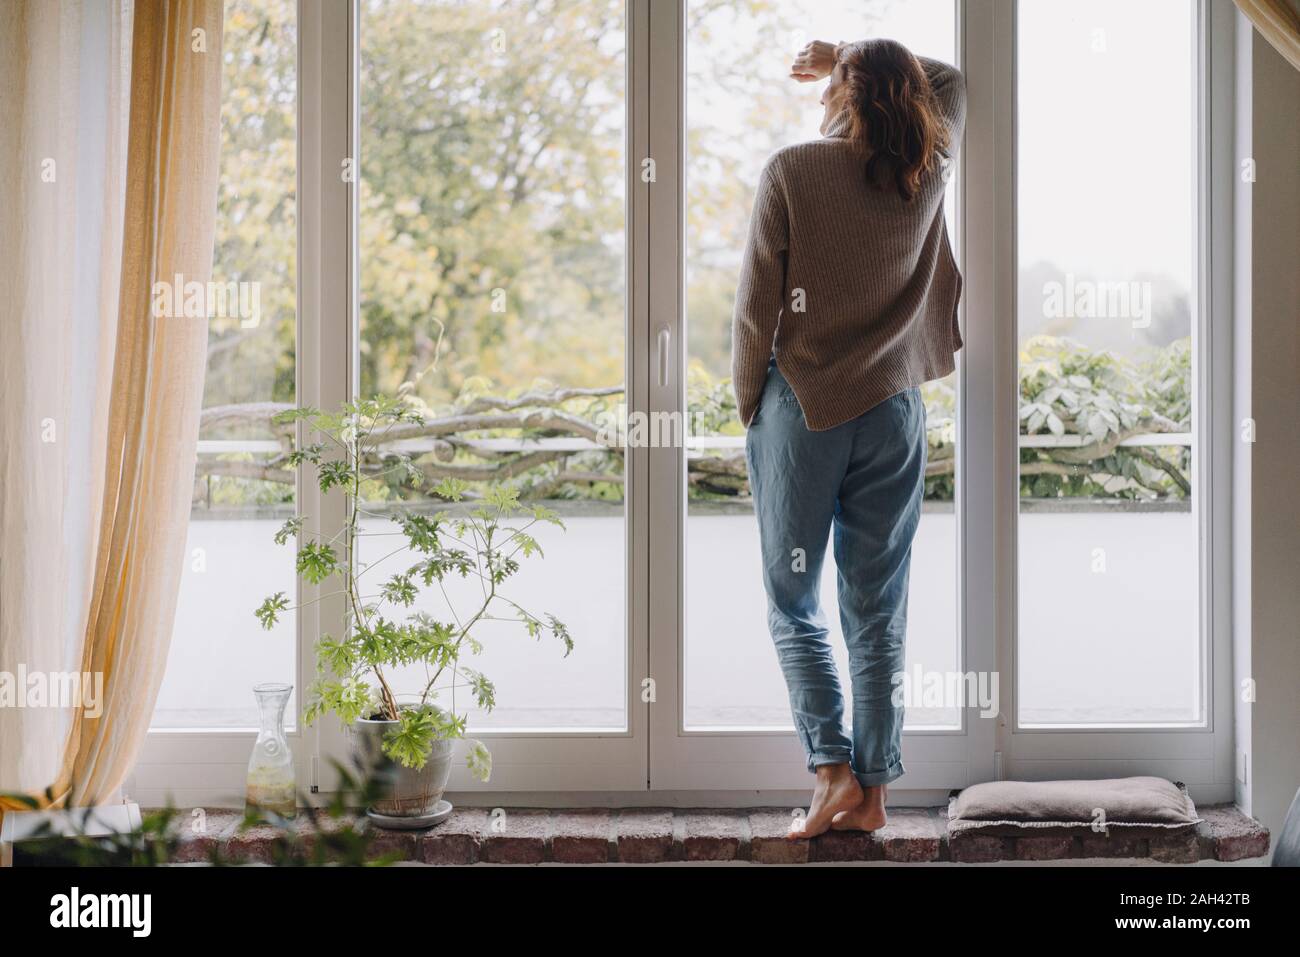 Woman looking out of window, rear view Stock Photo